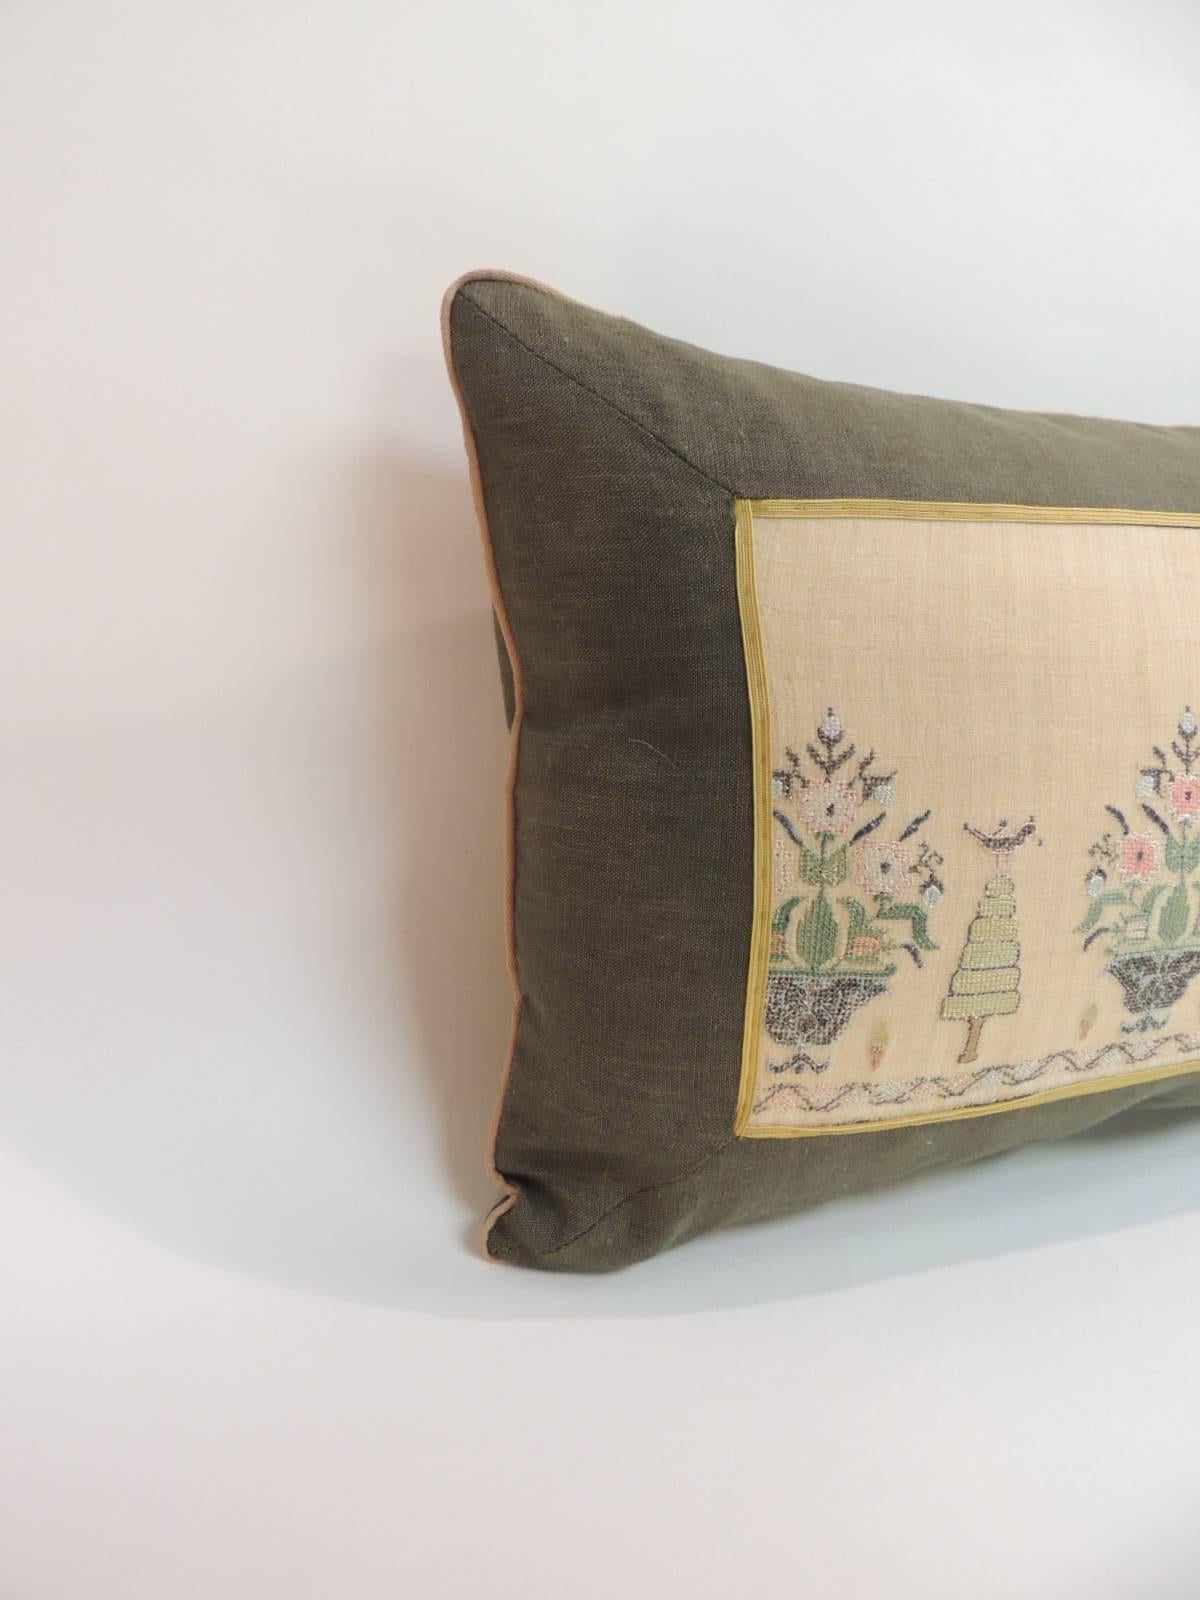 19th century Turkish embroidery lumbar pillow.
Turkish linen and silk embroidery lumbar pillow. Depicting flowers and trees, decorative gold trim across the linen frame. Green linen frame and backing. Small tan color rope trim all around.
Pillow